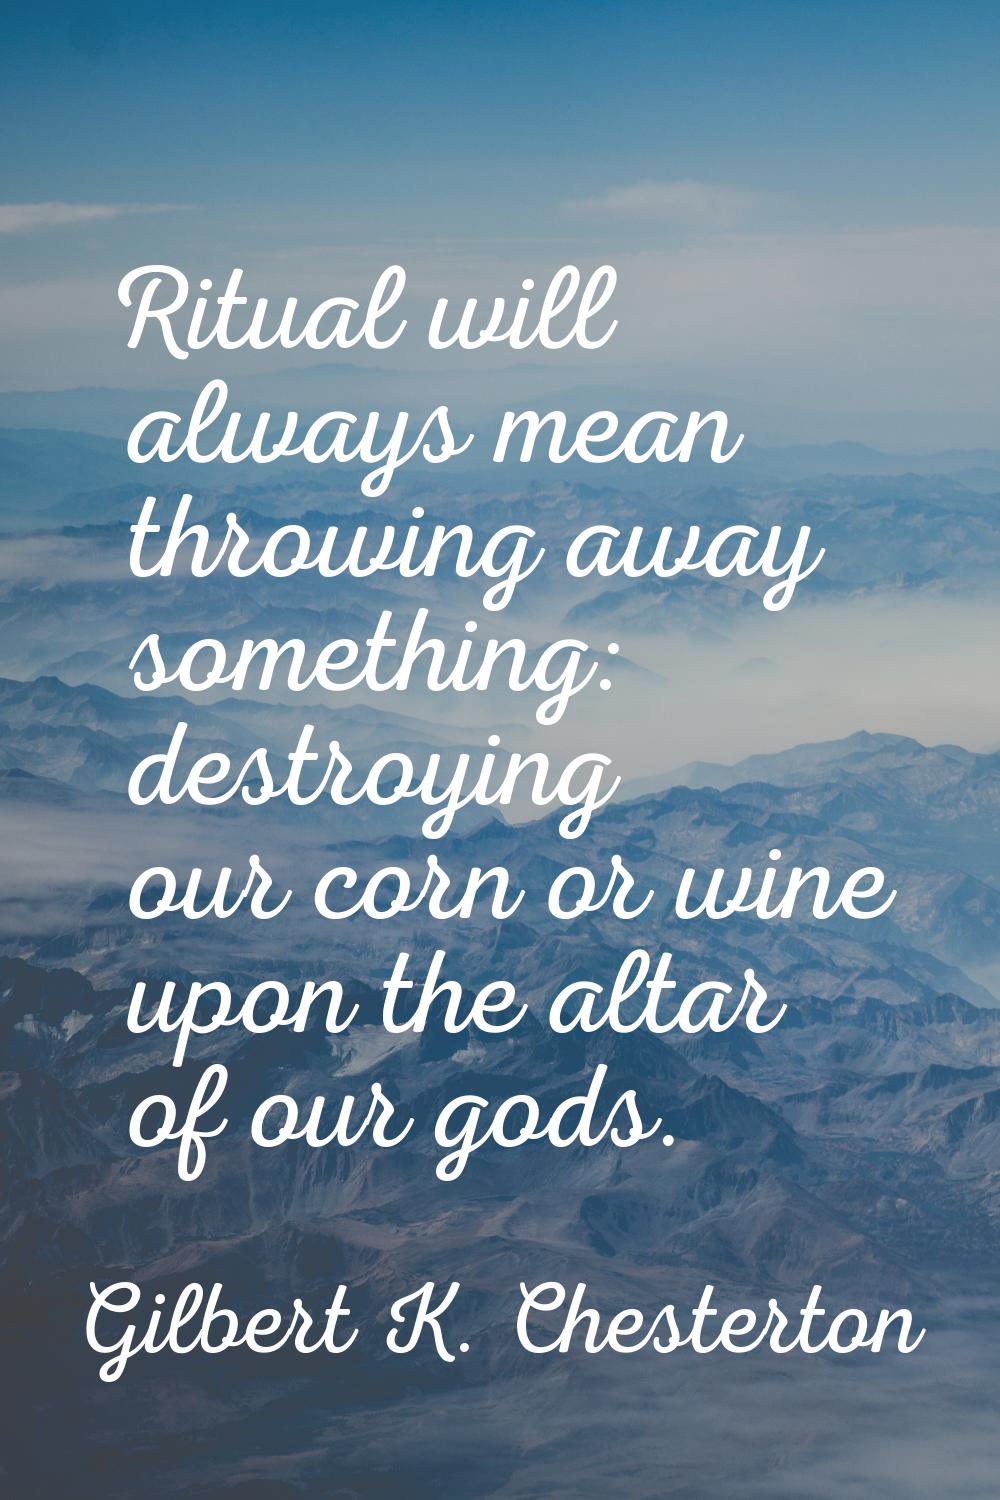 Ritual will always mean throwing away something: destroying our corn or wine upon the altar of our 